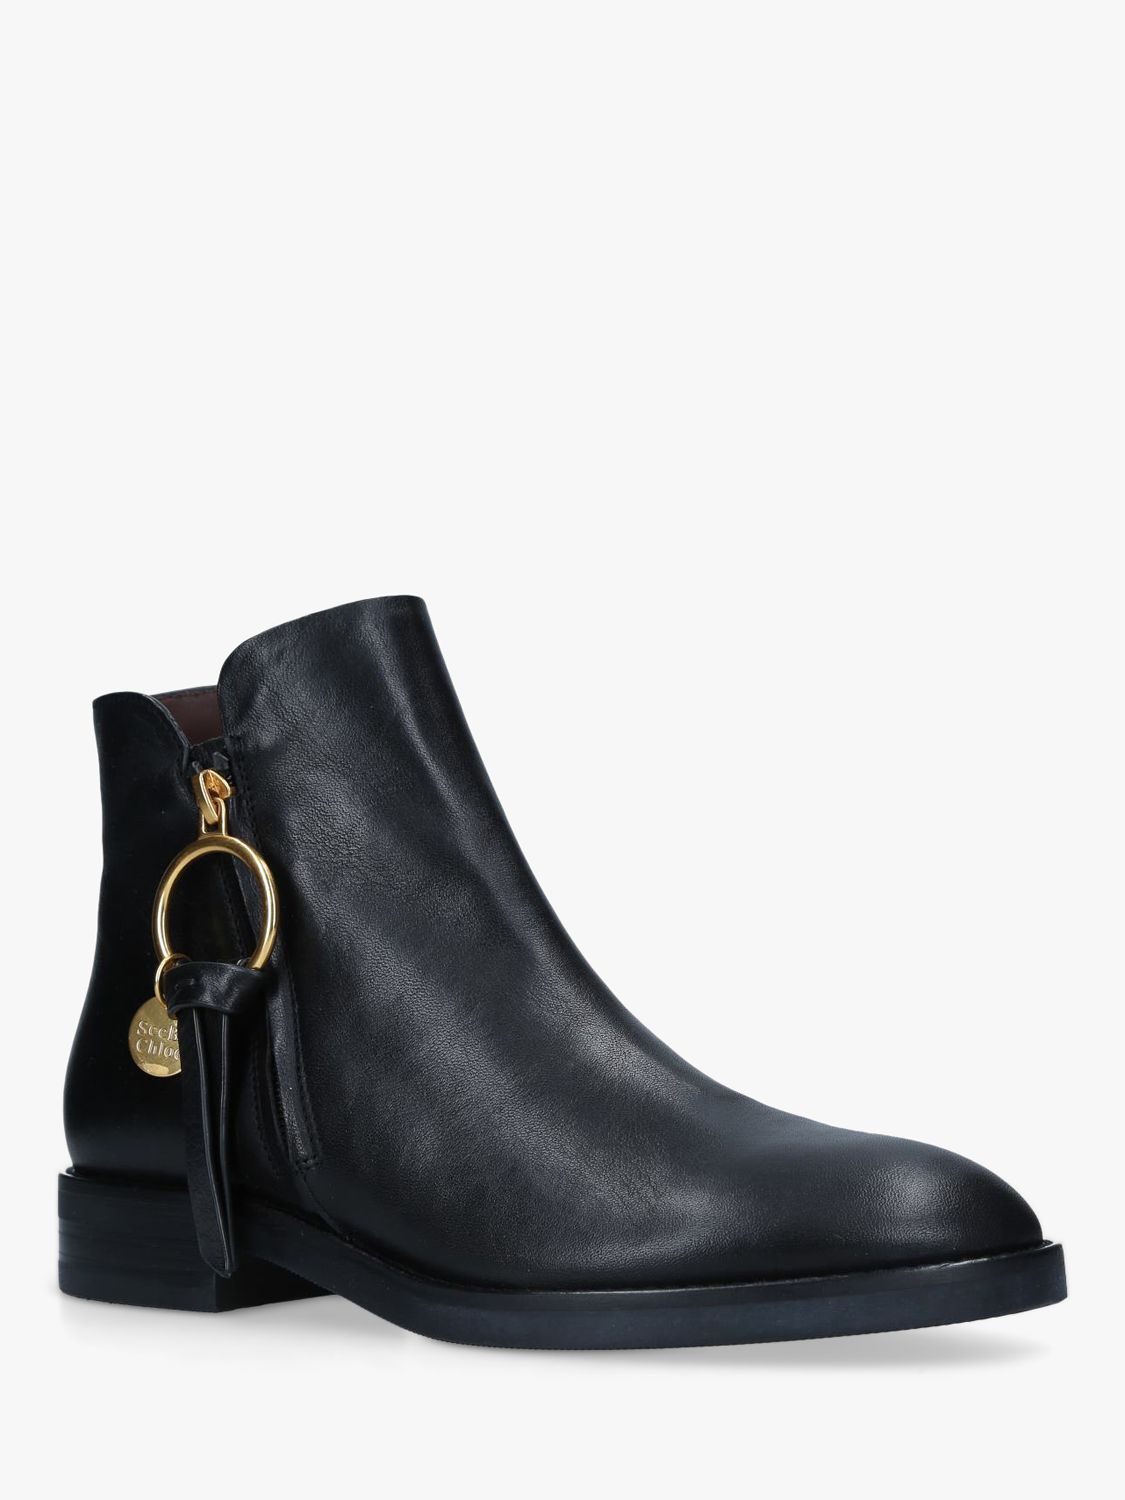 See by Chloé Louise Leather Zip Up Ankle Boots, Black at John Lewis ...